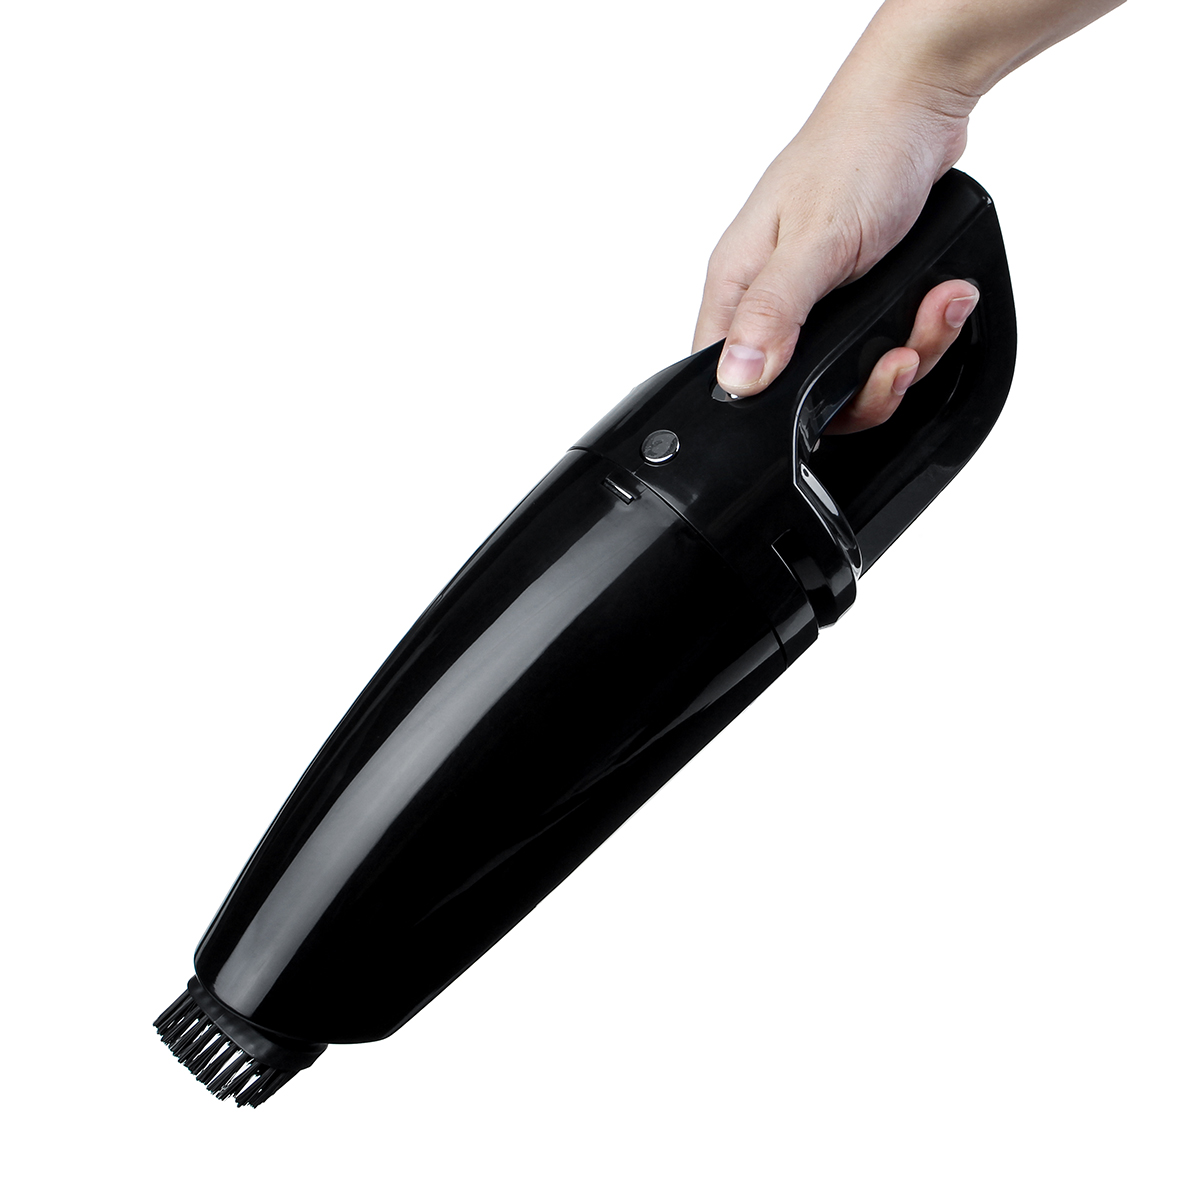 

4500PA 120W 22800 r/min Rechargeable Cordless Wet Dry Car Vacuum Cleaner Portable Home Cleaning